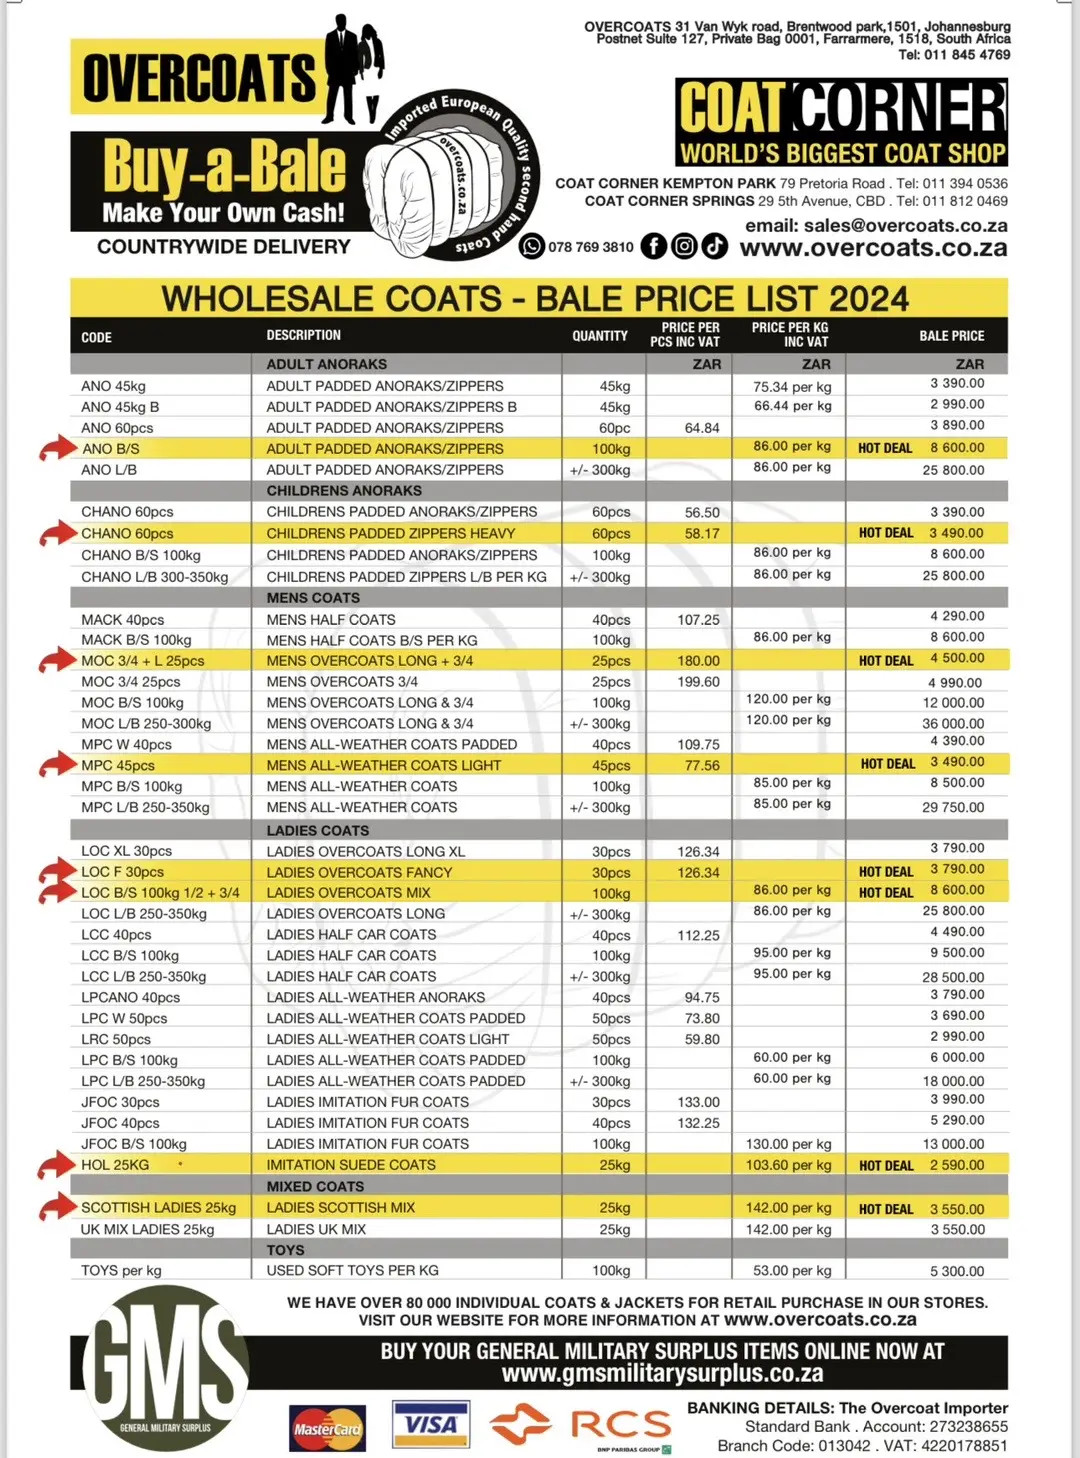 The 2024 bale price list! Drop us a dm or come in store if you are interested! Our locations are 31 Van Wyk Road Brentwood Park. 79 Pretoria road kempton park CBD. 29 5th Avenue springs Cbd. We courier bales nationwide. #southafrica #overcoats #coatcorner #thrift #wholesale 